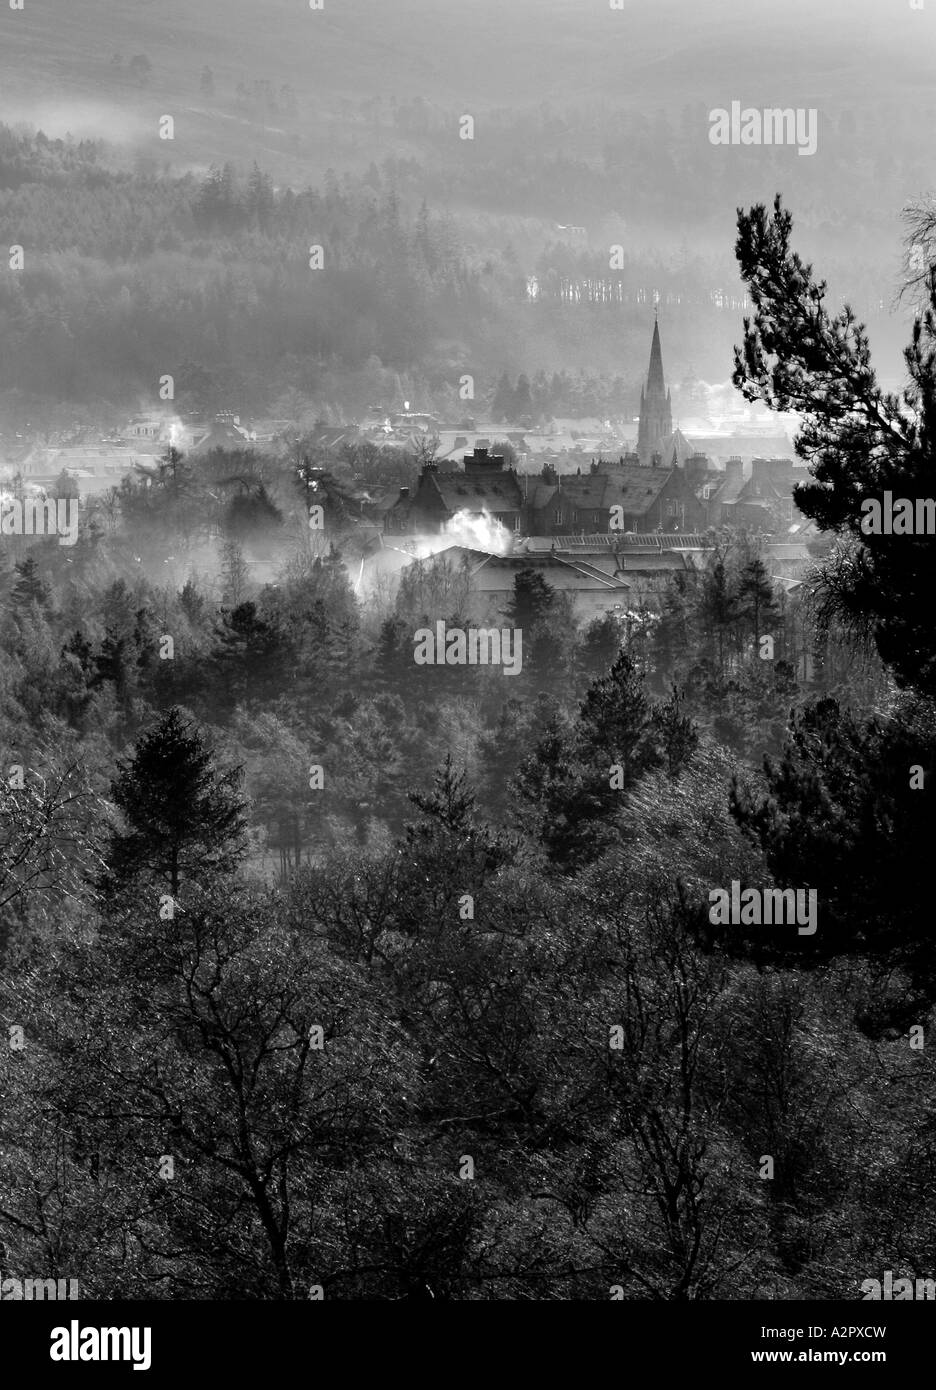 A moody black and white portrait format image of Ballater, Scotland looking down from Craigendarroch in winter. Stock Photo